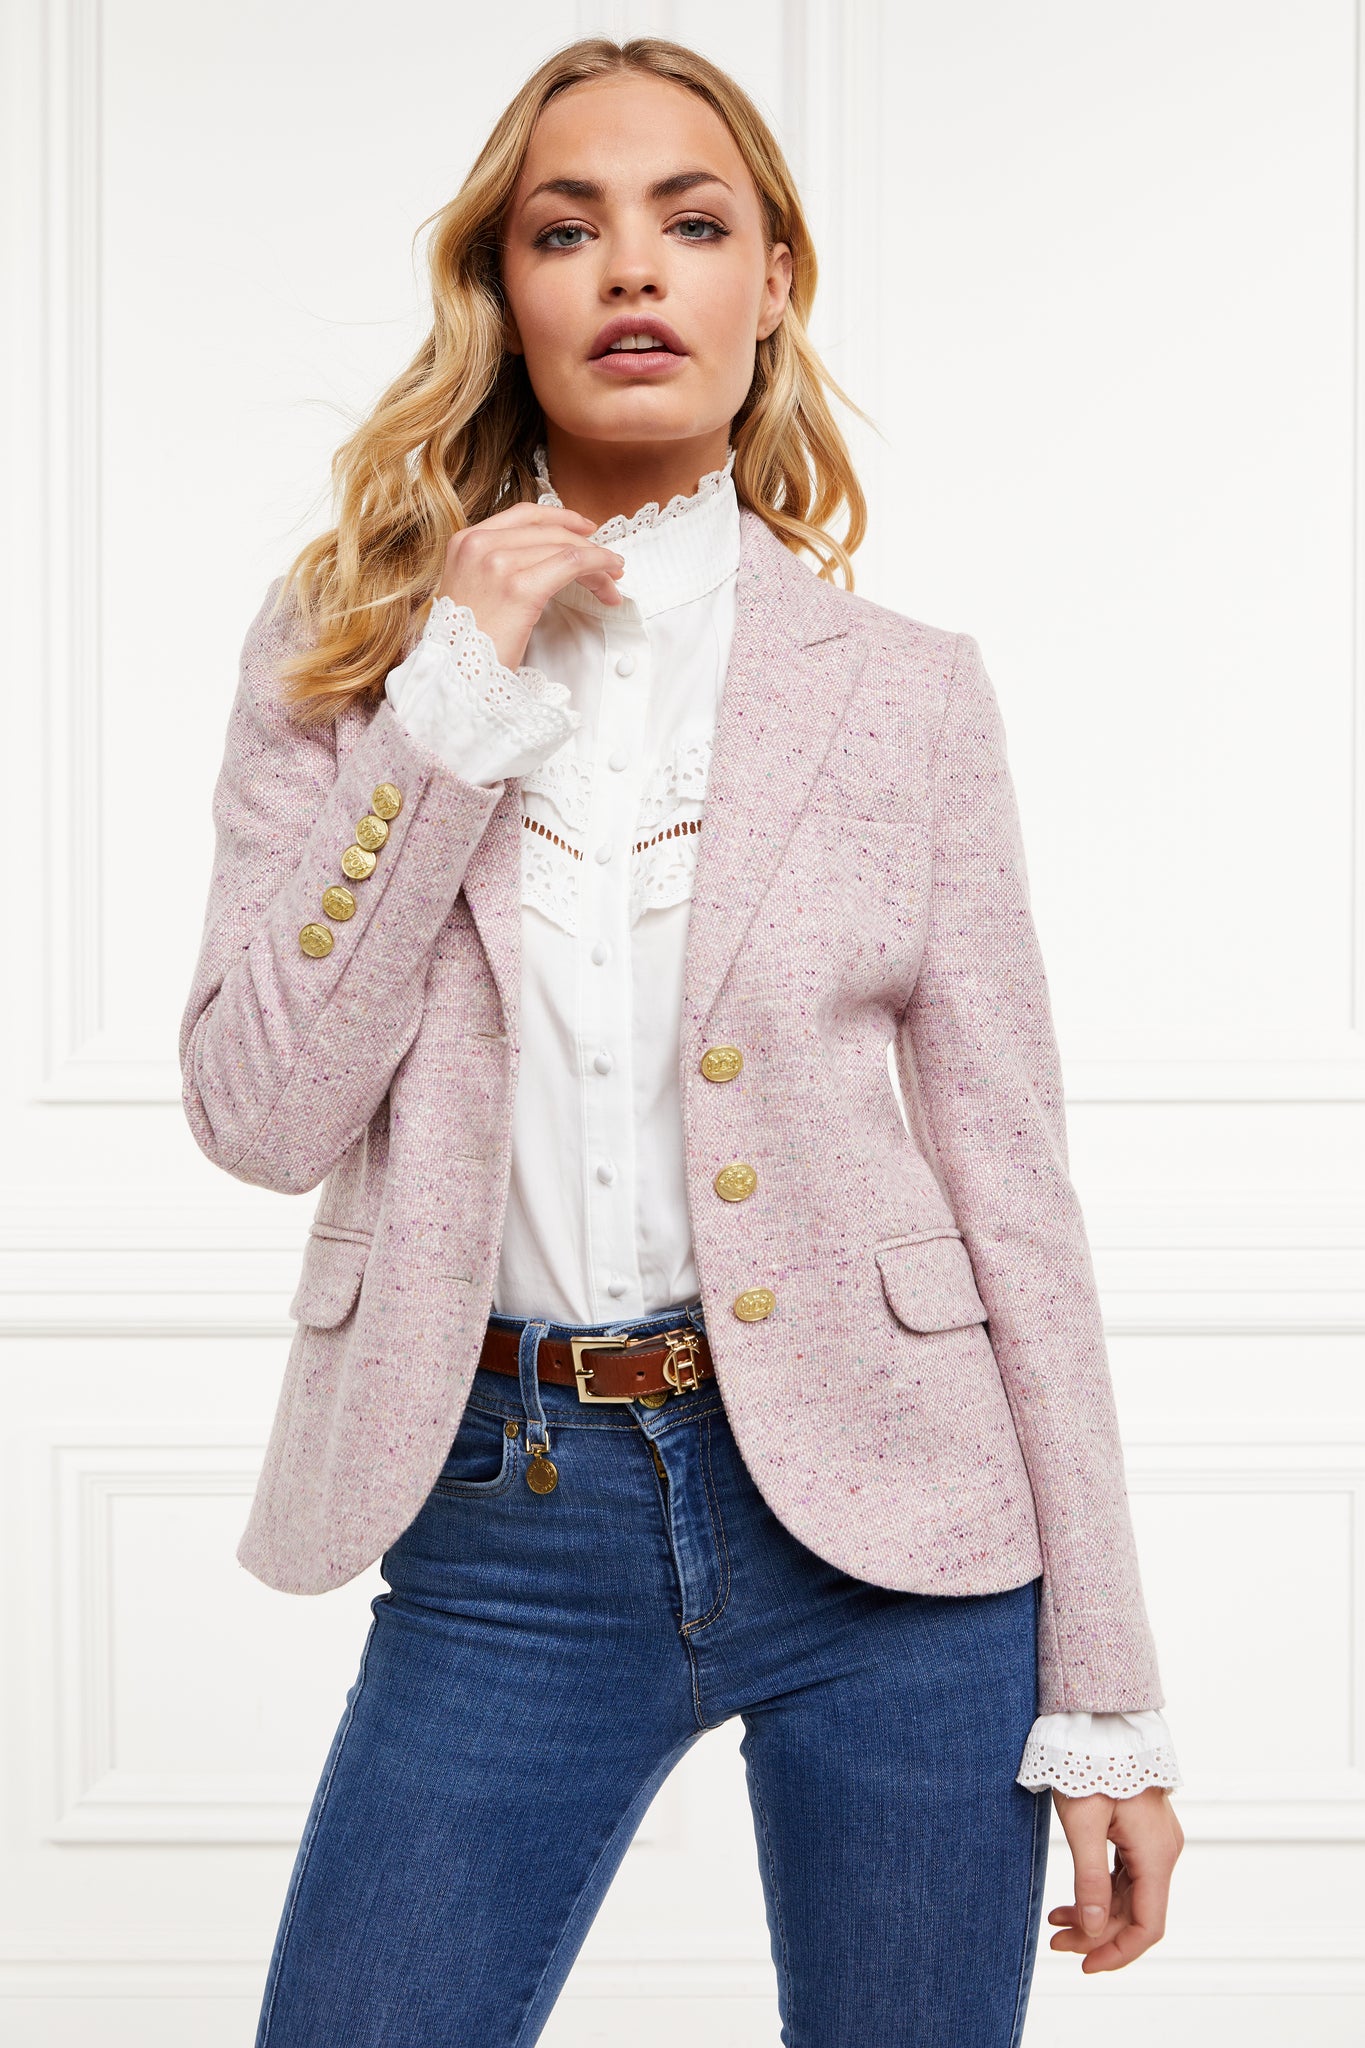 a classic single breasted blazer in pale pink that is tailored with a a classic cut and fitted silhouette with welt pockets and gold button detail on the front and sleeves worn with white shirt and classic denim skinny jeans 